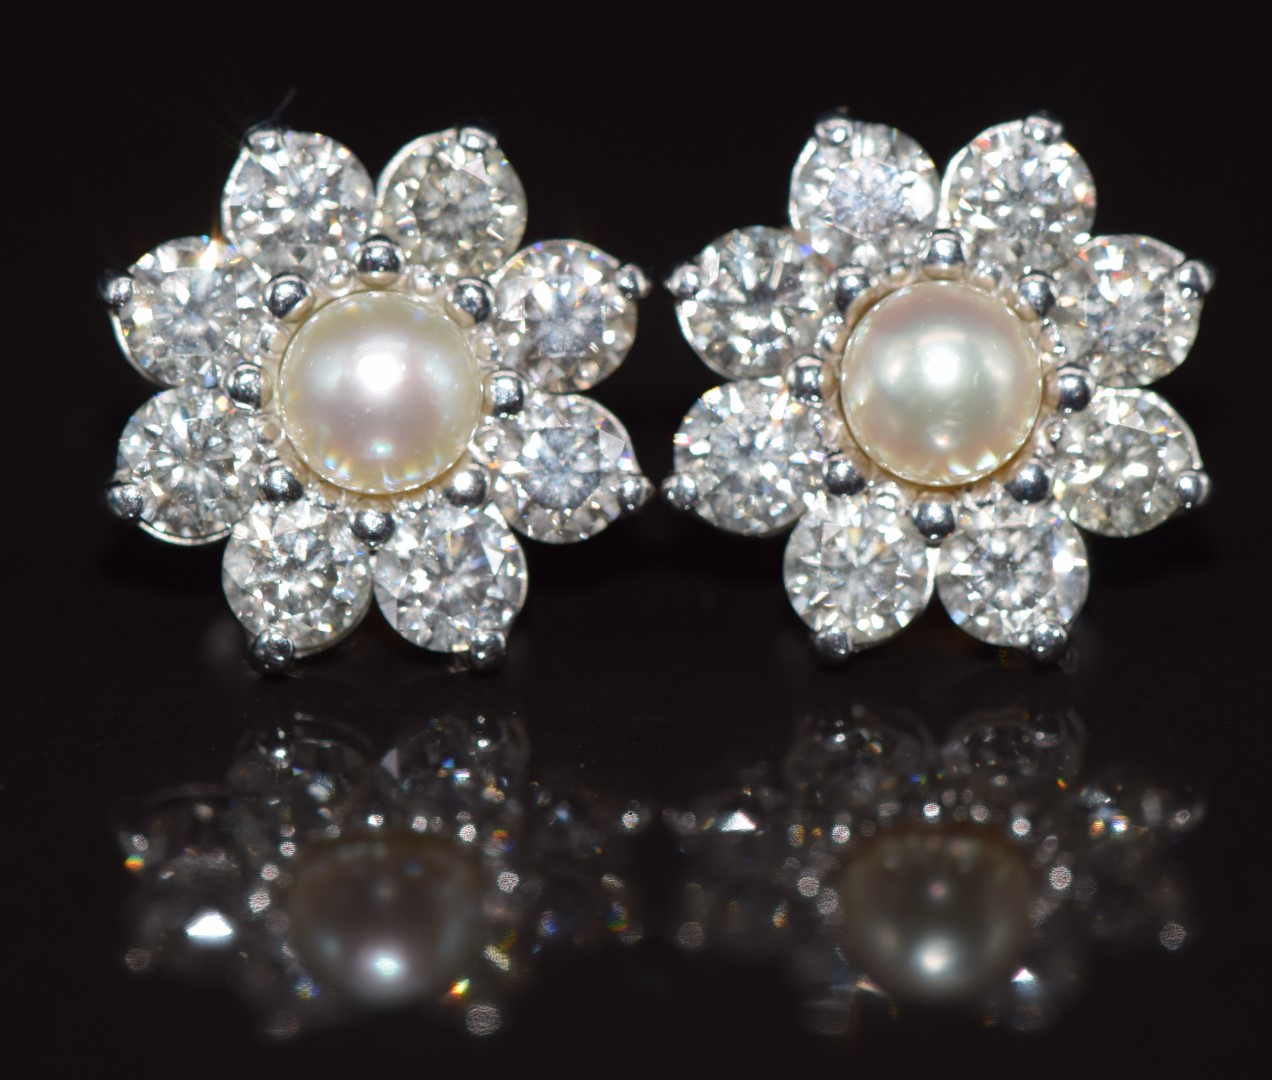 A pair of 18ct white gold earrings each set with a natural pearl measuring 5.3mm surrounded by eight - Image 2 of 3